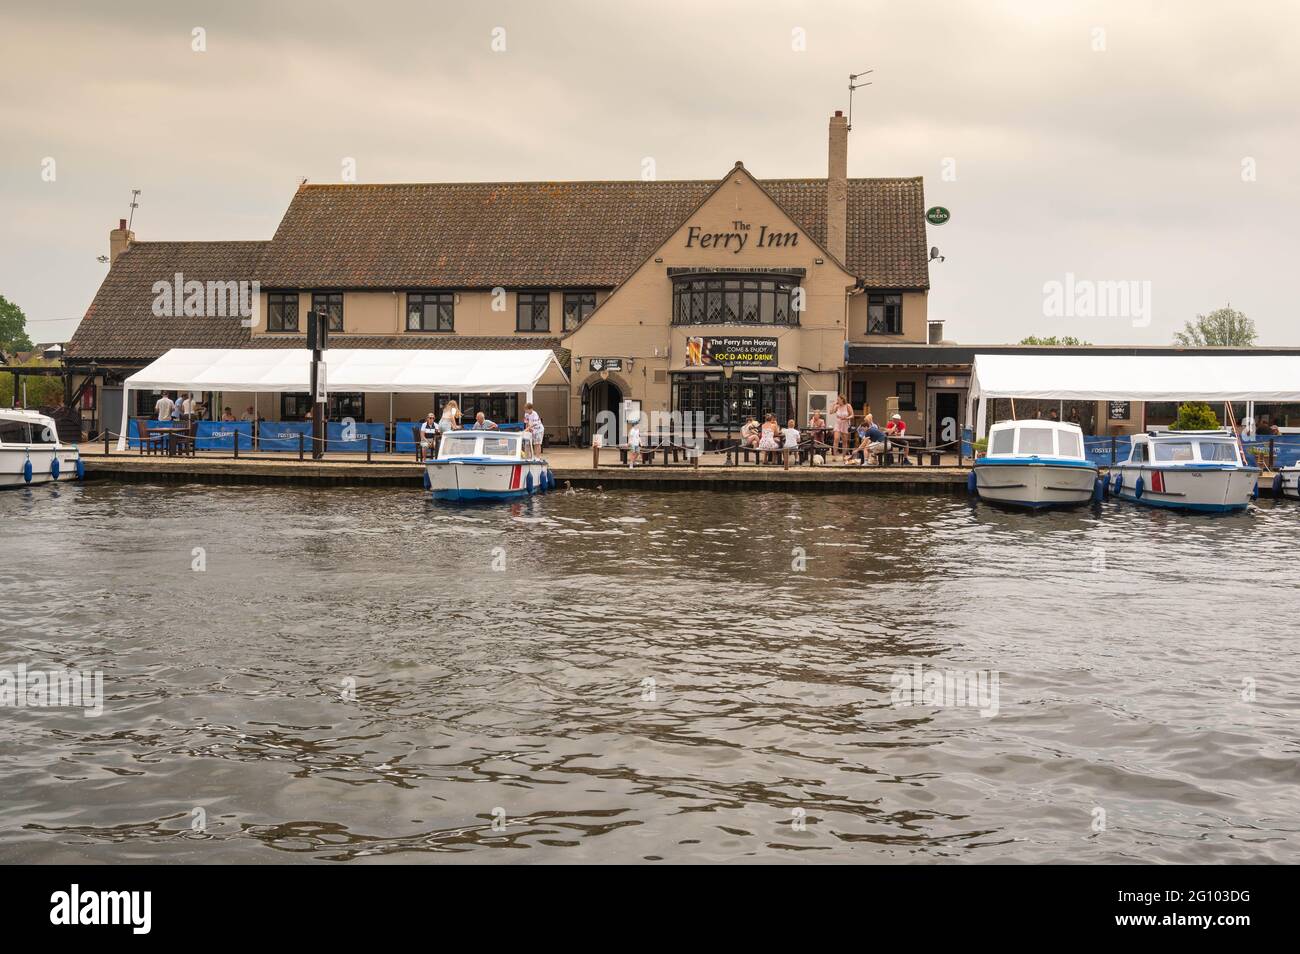 A view of the Ferry Inn Public house from across the river Bure Stock Photo